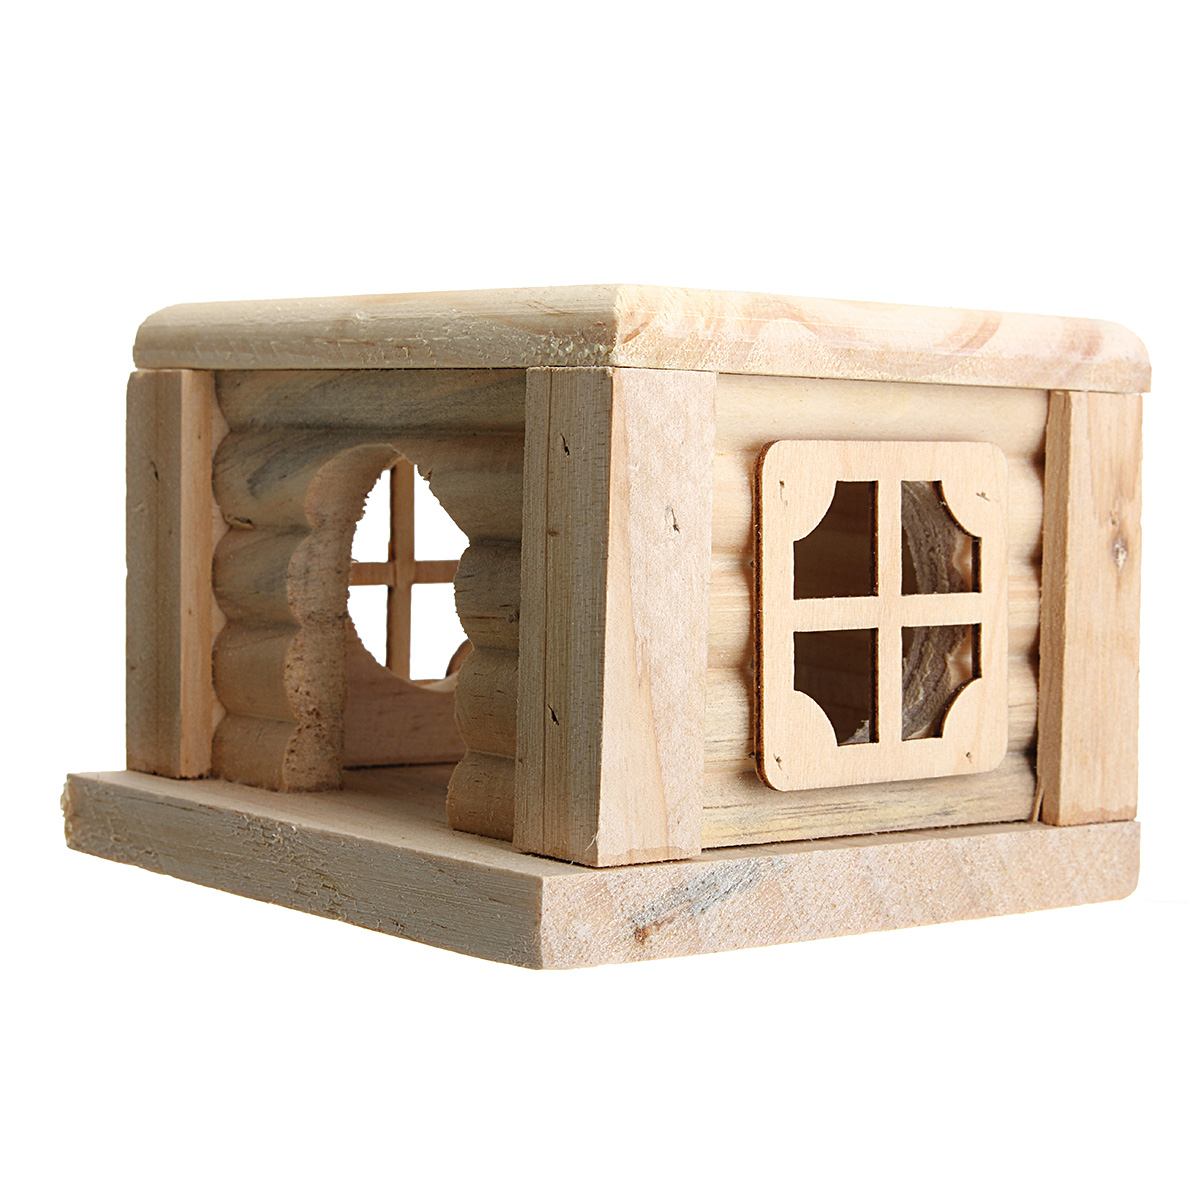 Toy-Wooden-Hamster-House-Bedroom-Dwarf-Cage-Rat-Mouse-Gerbil-Exercise-Natural-1128636